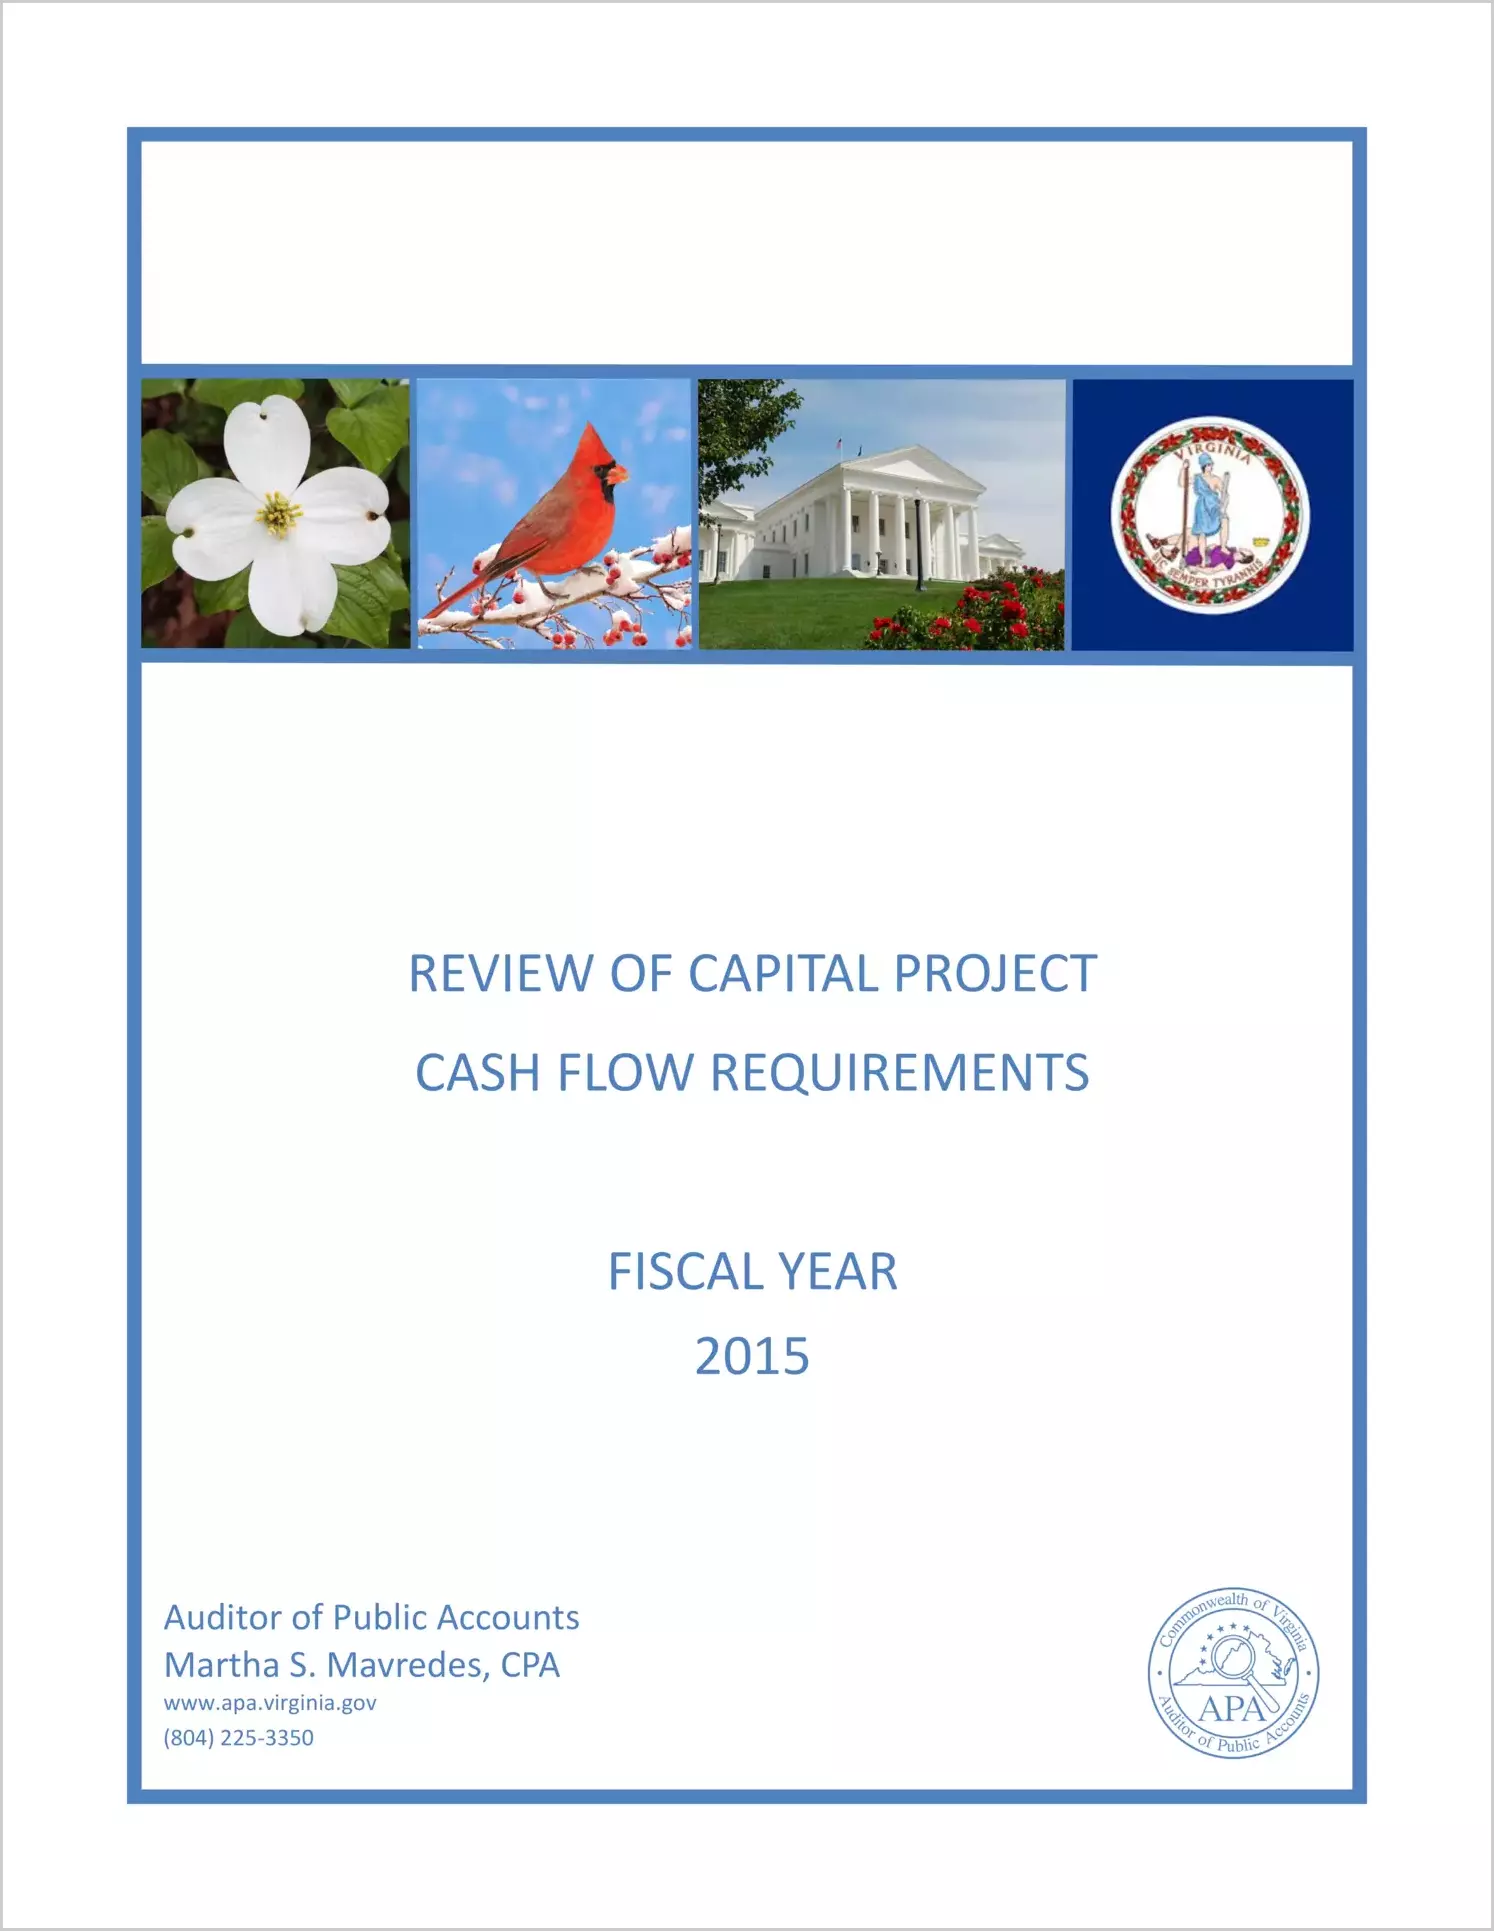 Review of Capital Project Cash Flow Requirements - Fiscal Year 2015